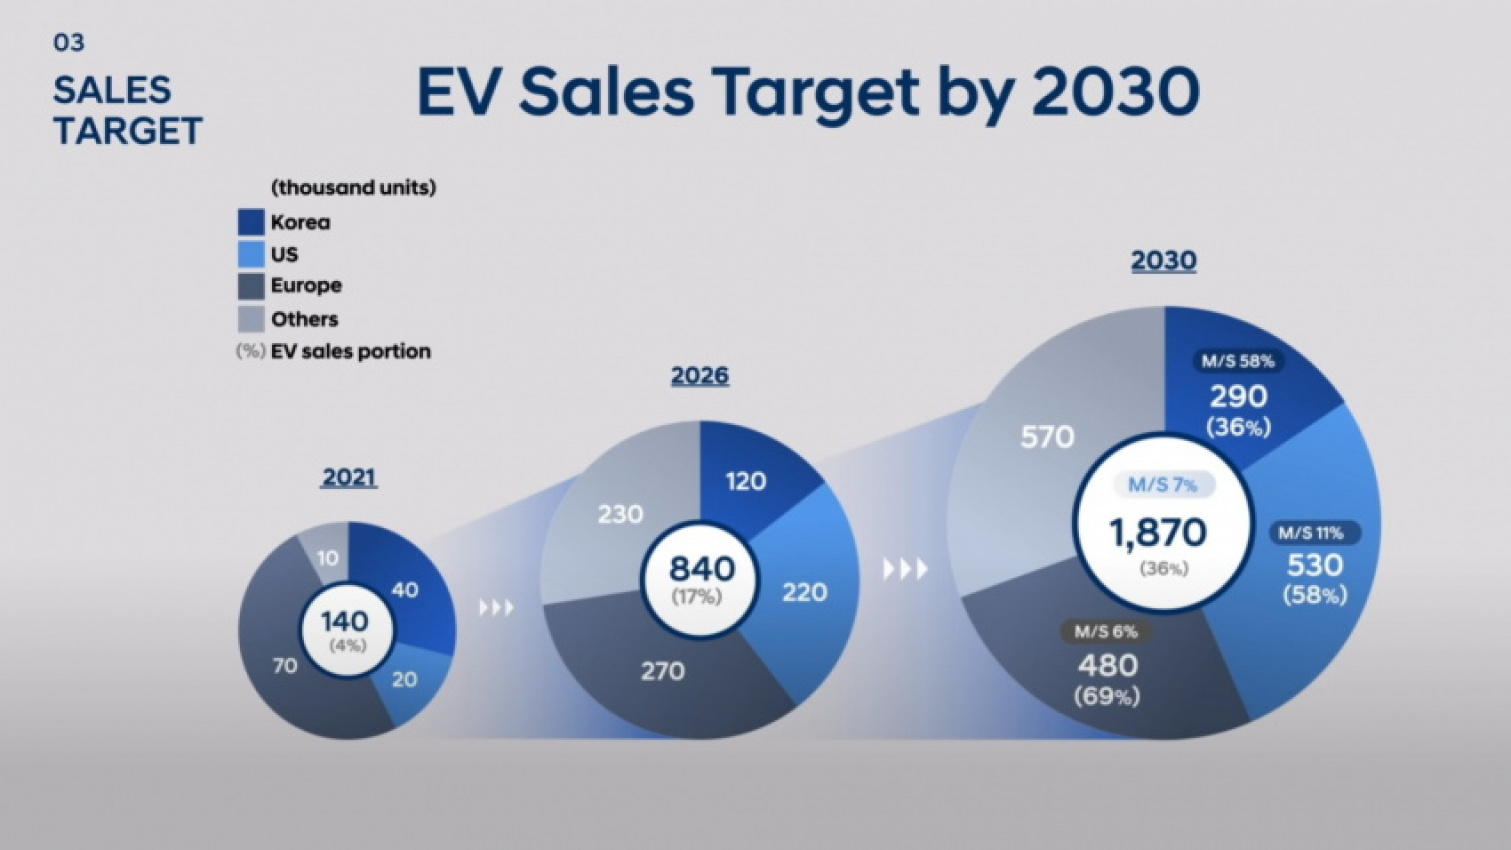 autos, cars, genesis, hyundai, news, electric vehicles, hyundai videos, industry, video, hyundai and genesis to launch 17 new electric cars by 2030